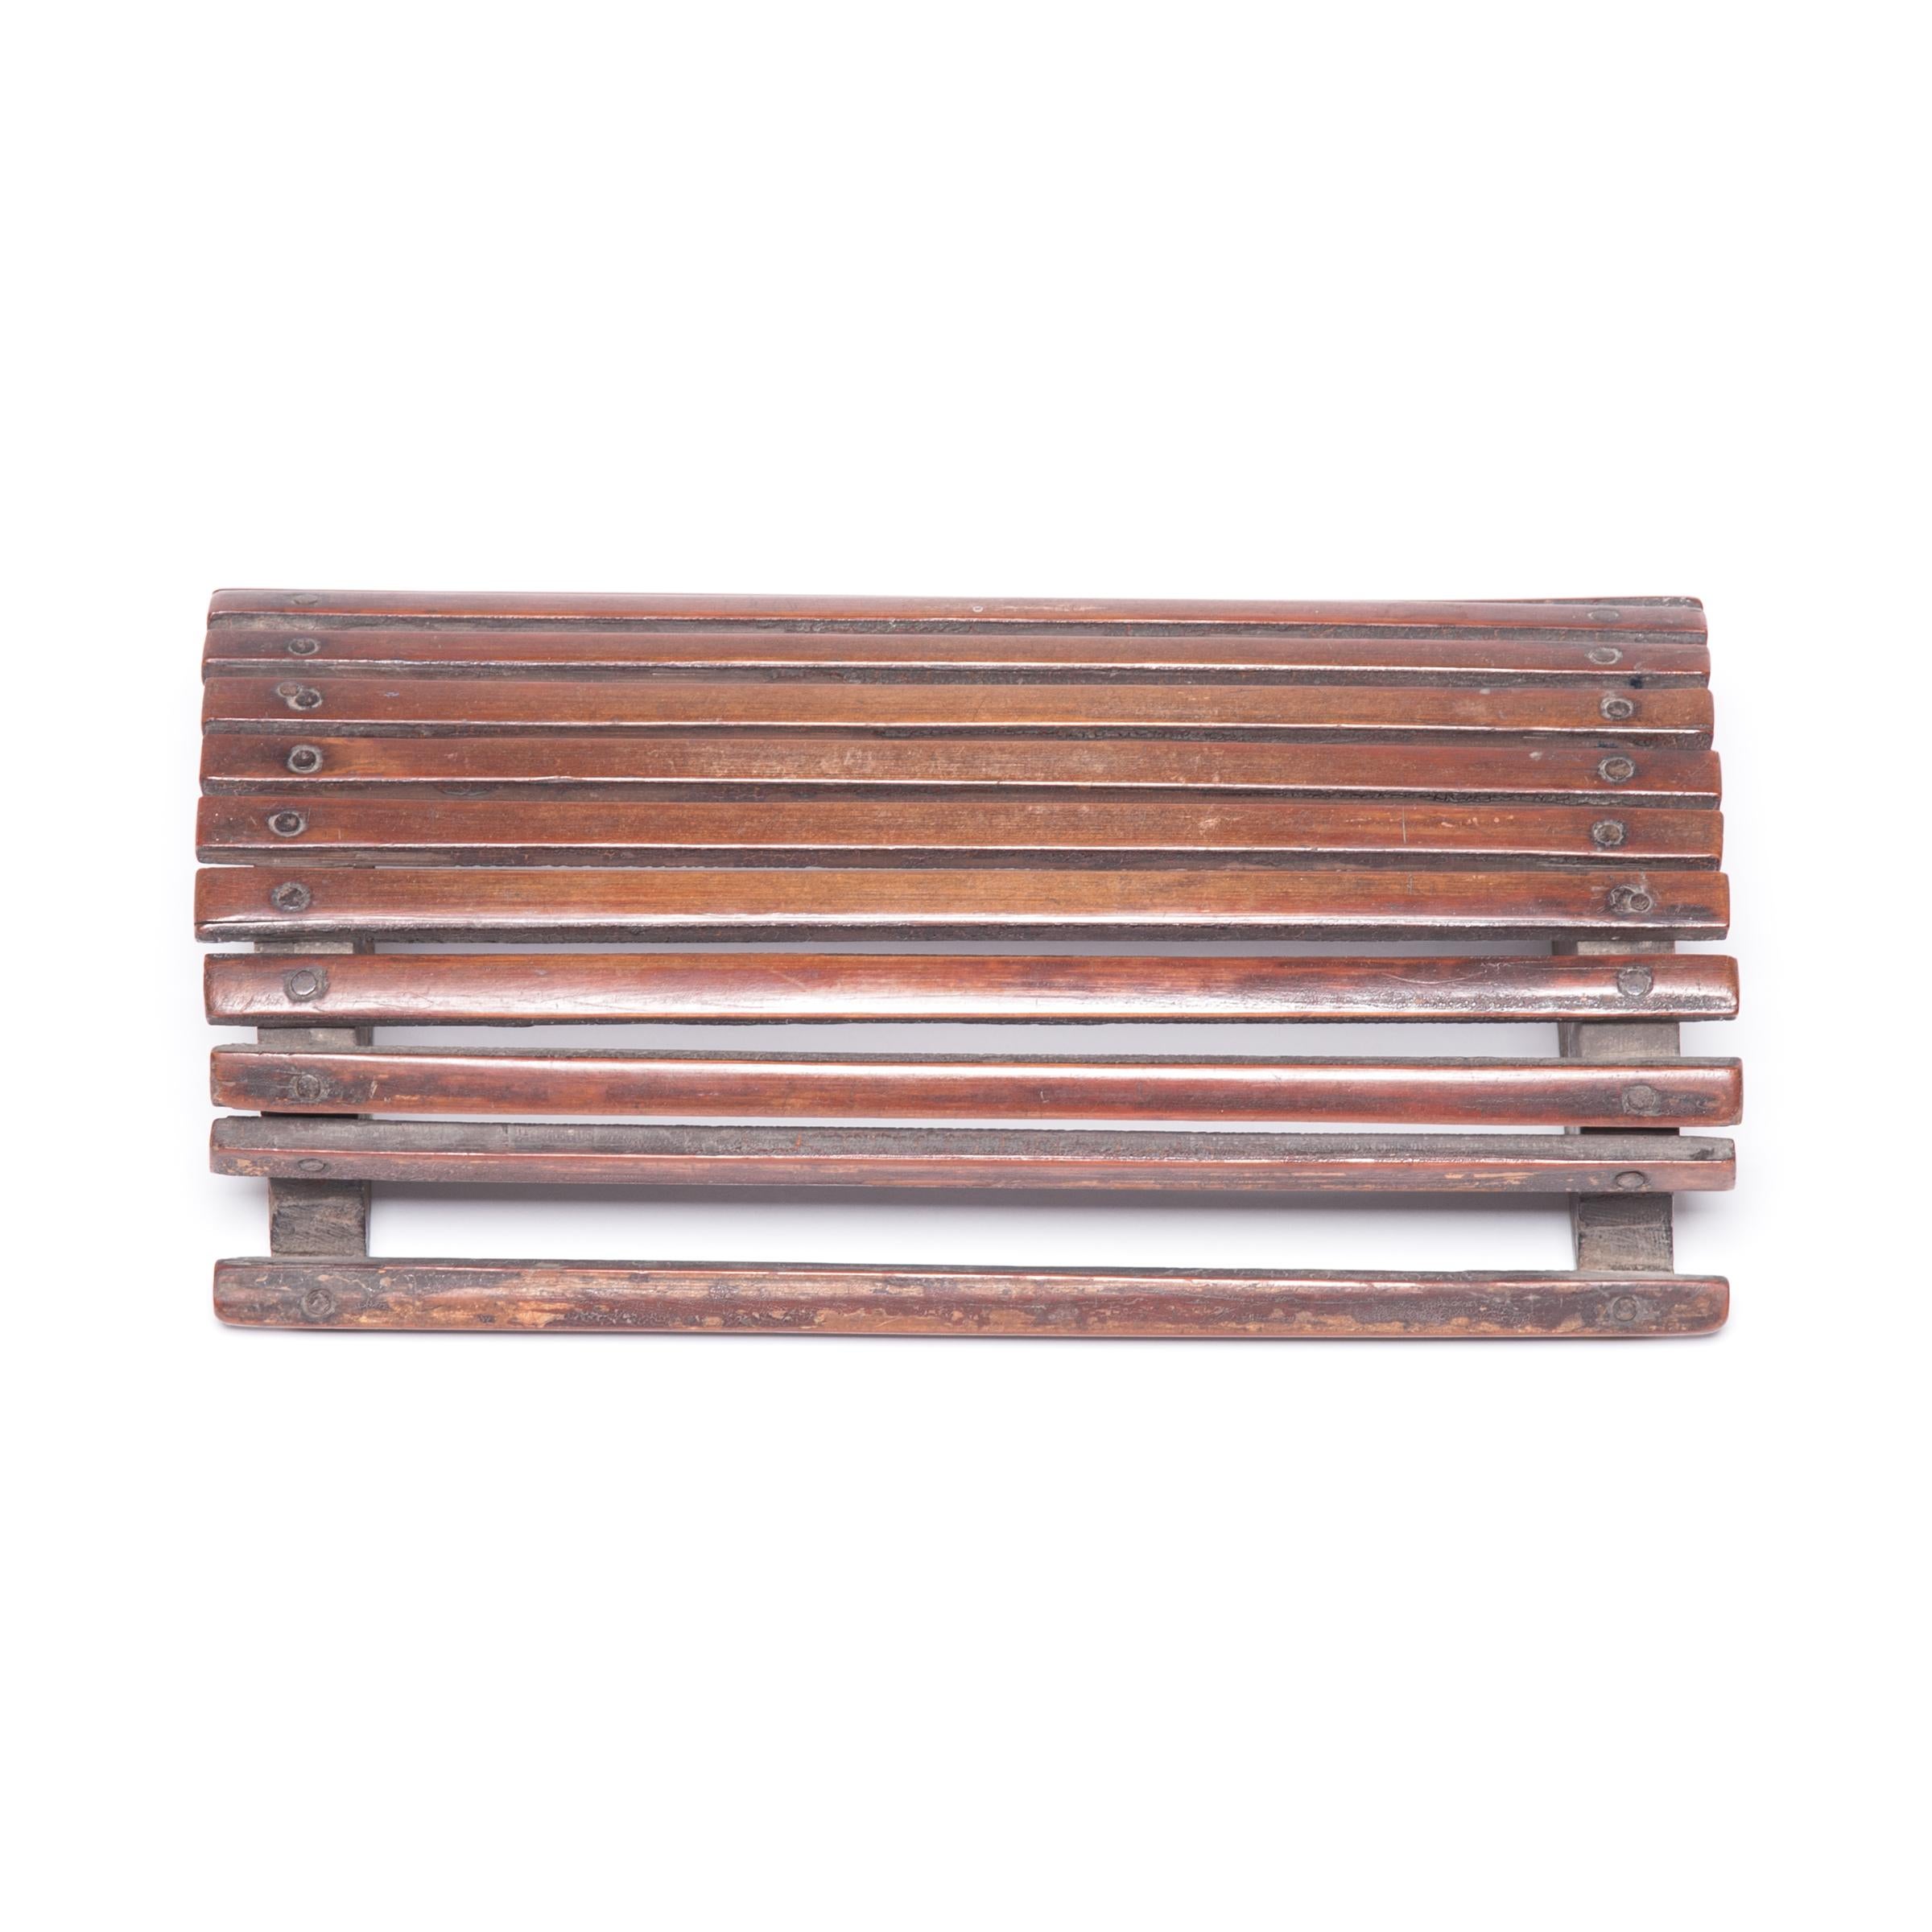 Rustic Chinese Slatted Bamboo Headrest, c. 1900 For Sale